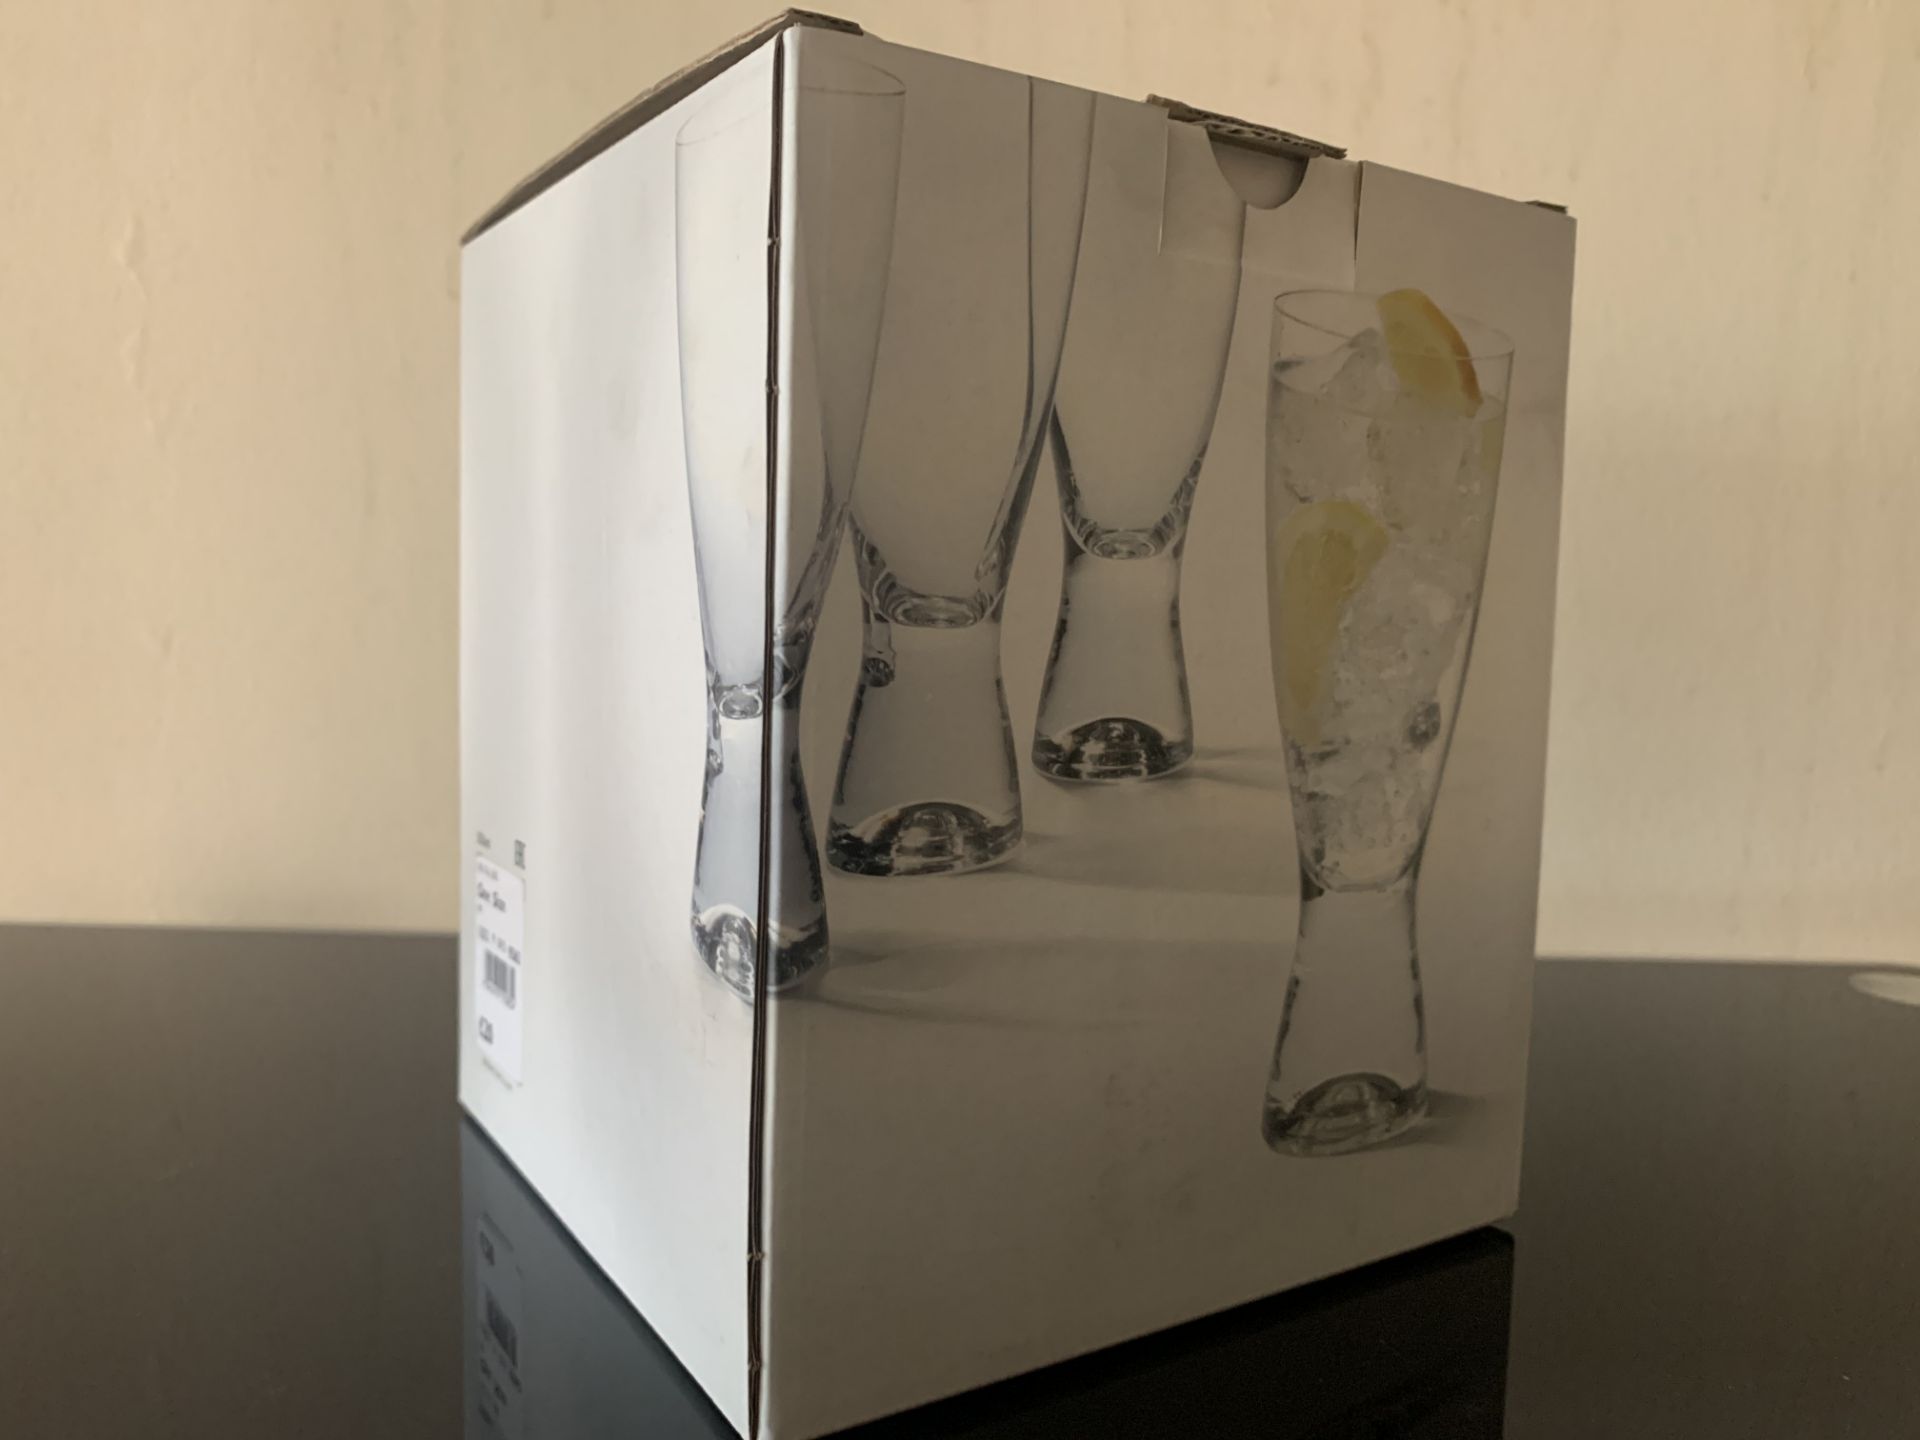 6 X BRAND NEW BOXES OF 4 OSLO GLASSES ( 350ML ) PRICE MARKED AT £20 PER SET